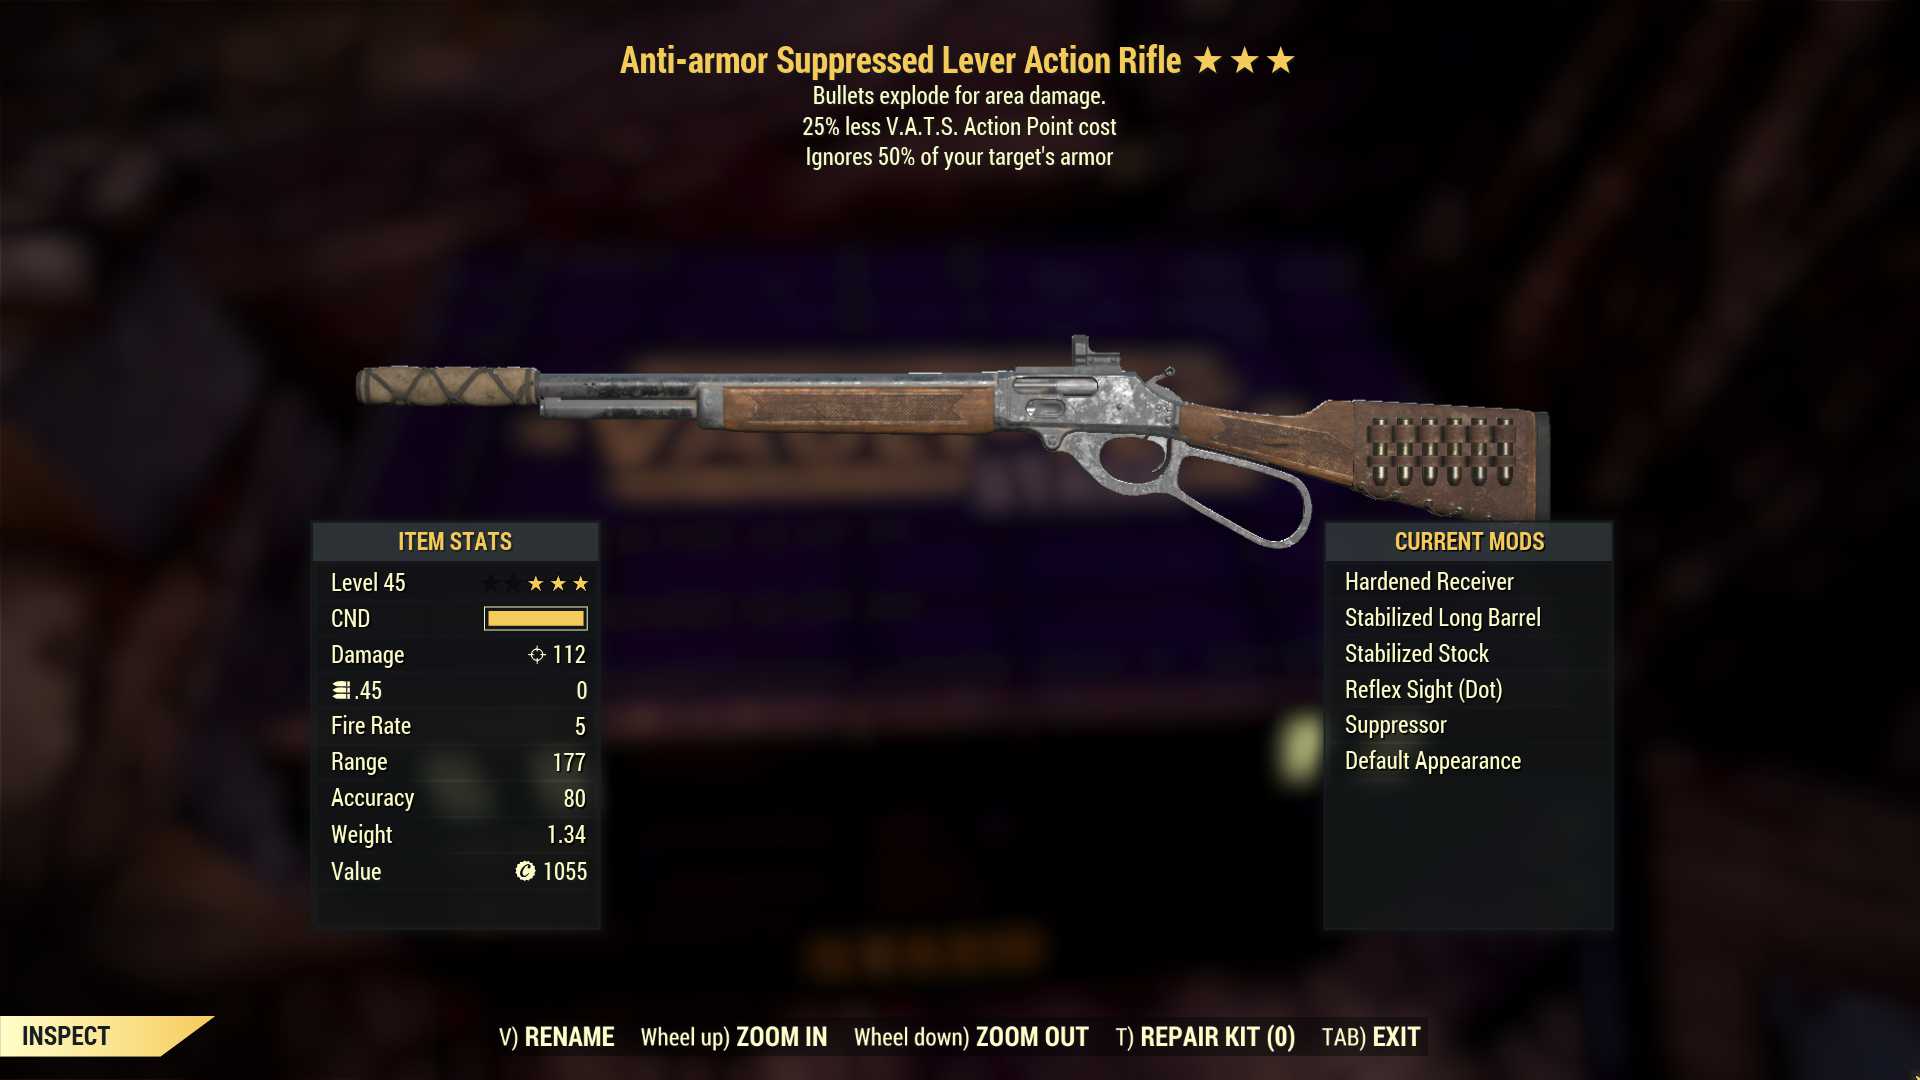 Anti-Armor Explosive Lever Action Rifle (25% less VATS AP cost)